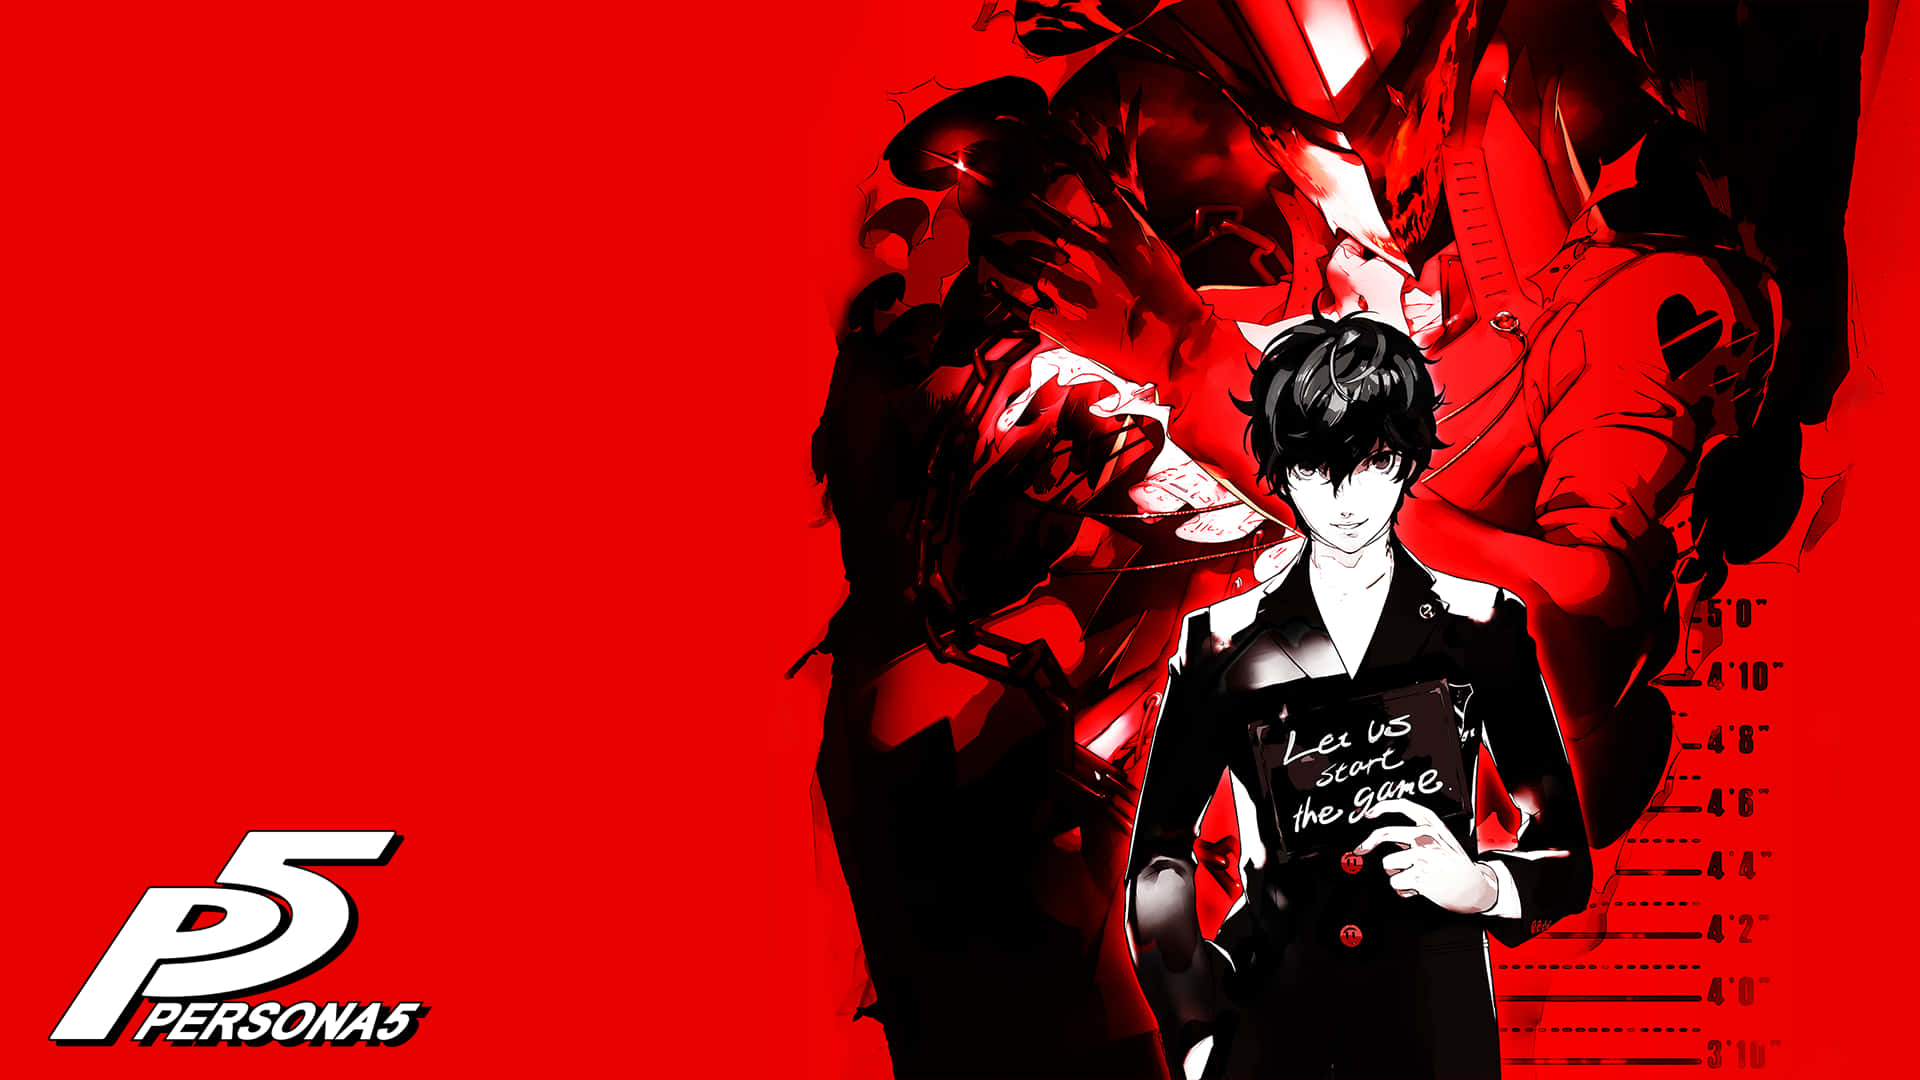 Feel the Power of Rebellion with the Persona 5 Logo Wallpaper